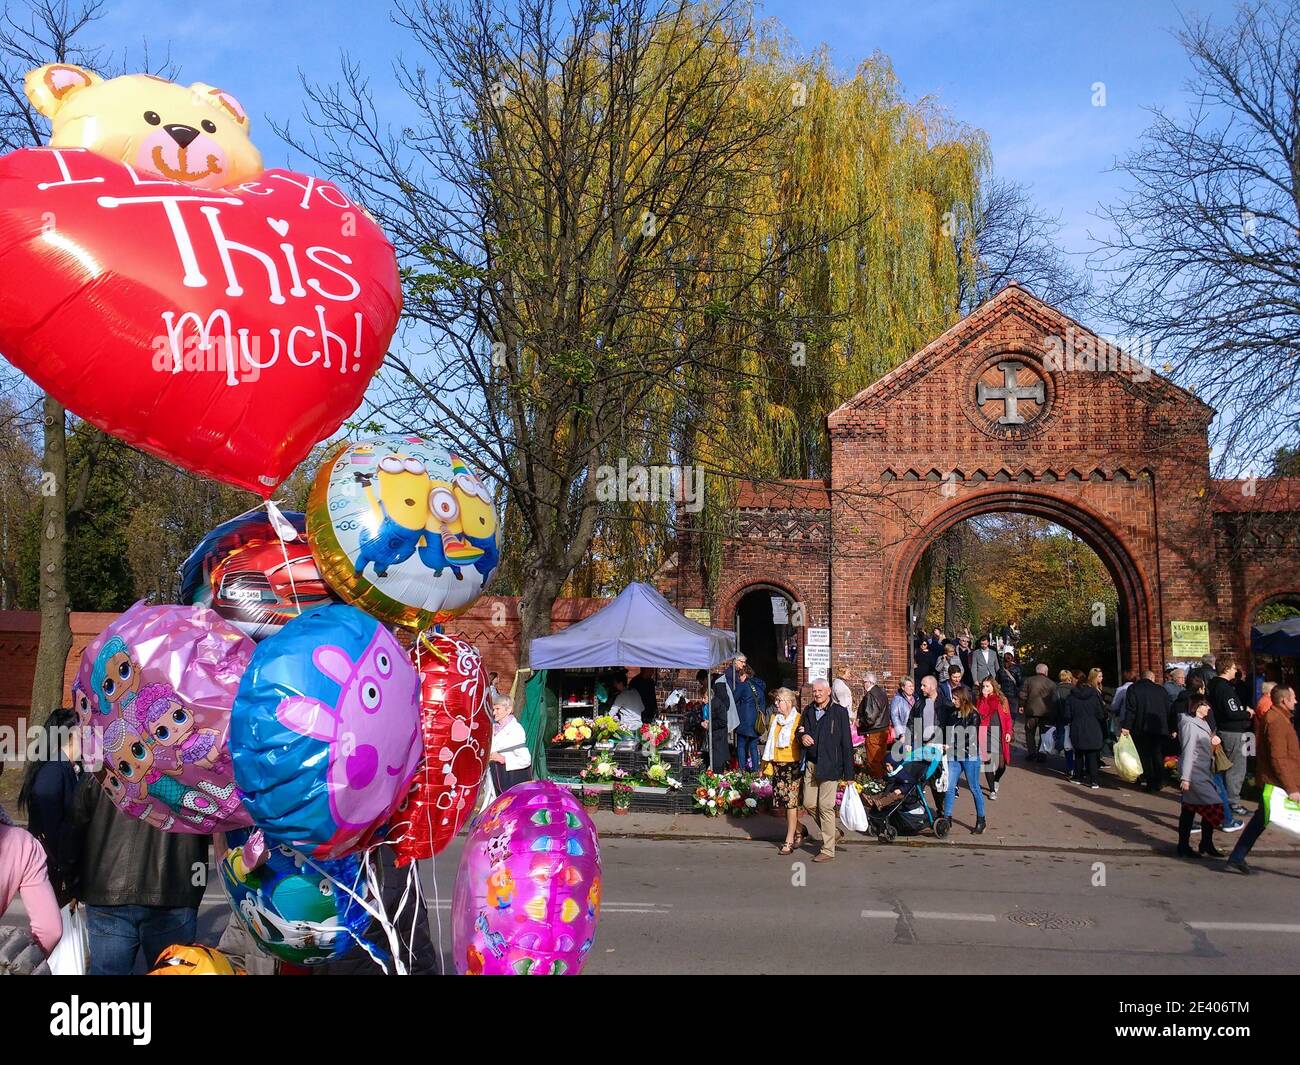 BYTOM, POLAND - NOVEMBER 1, 2018: People visit graves during All Saints Day in Bytom. All Saints Day celebrations at cemeteries is one of most importa Stock Photo